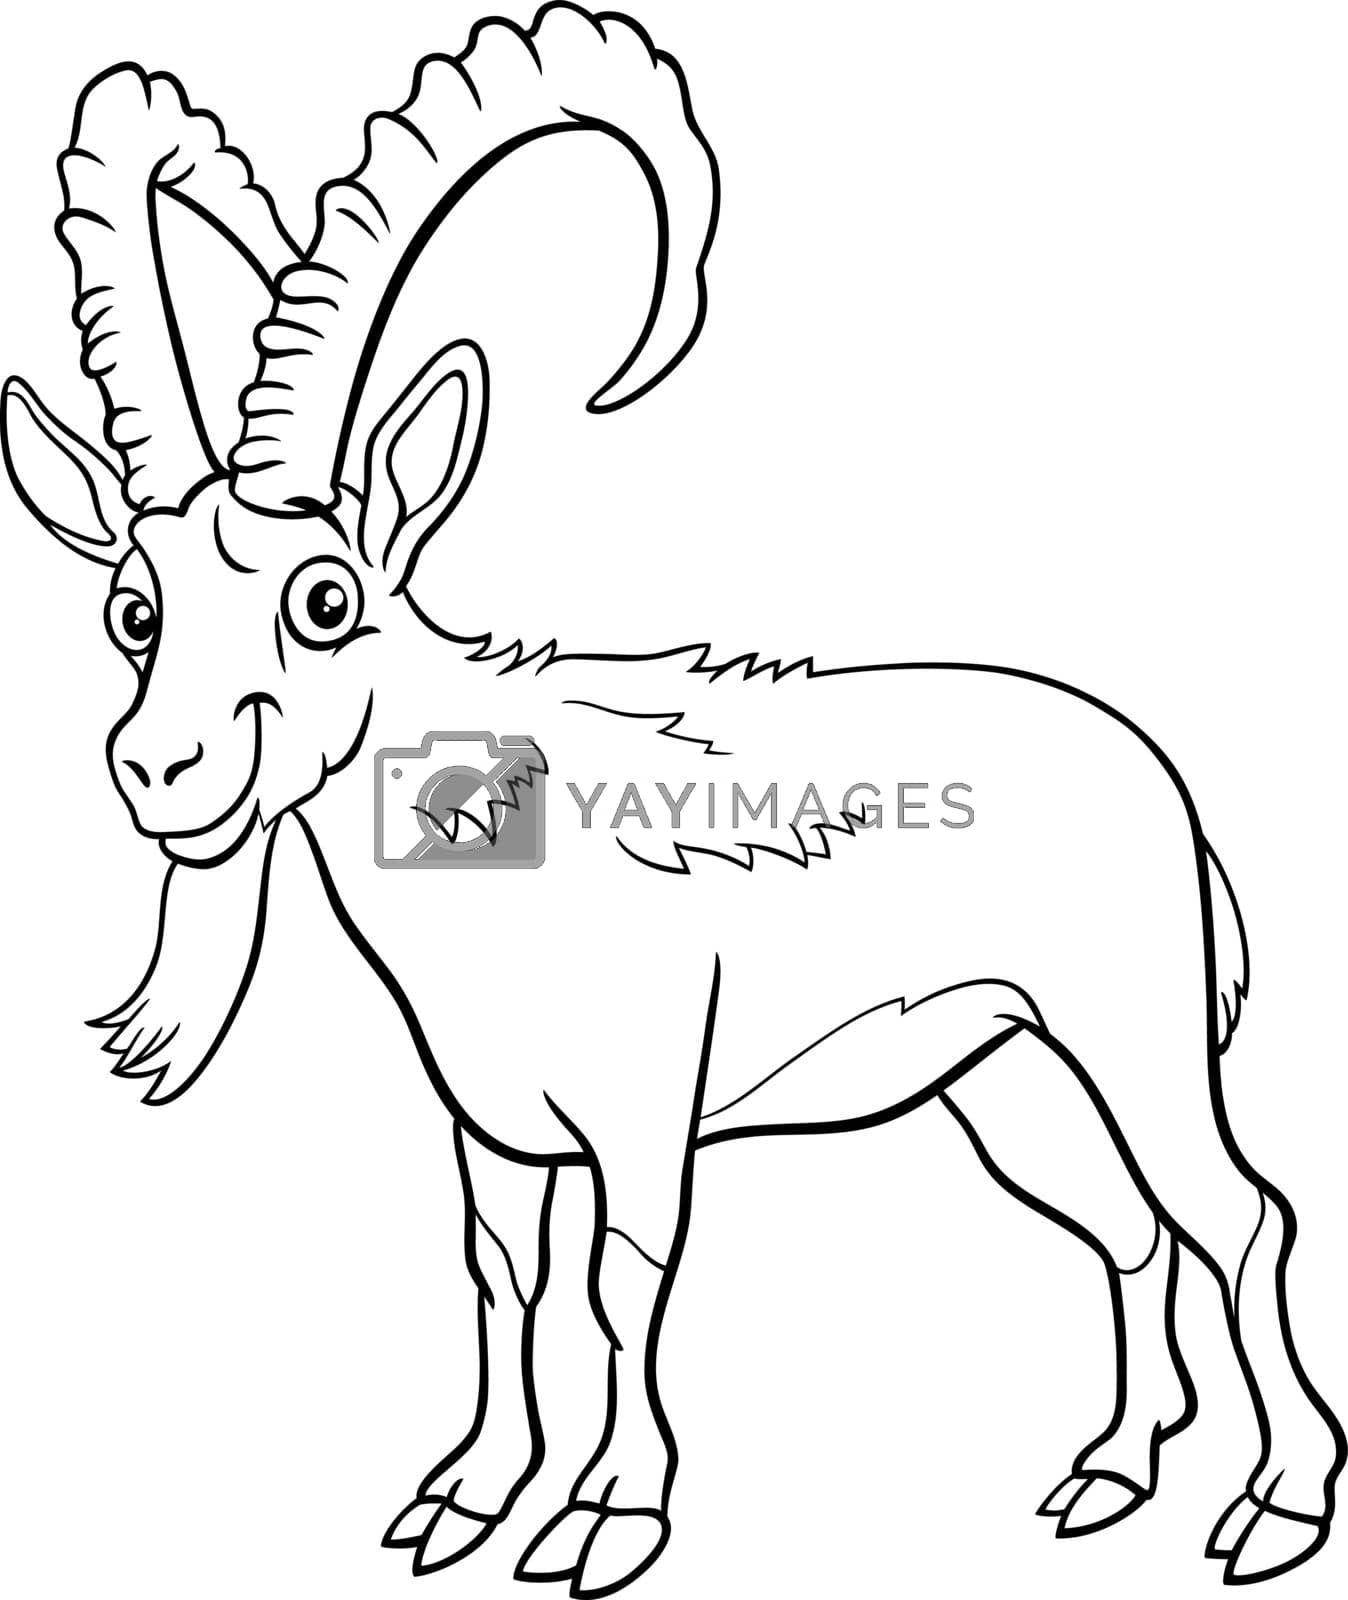 Royalty free image of cartoon ibex comic animal character coloring book page by izakowski